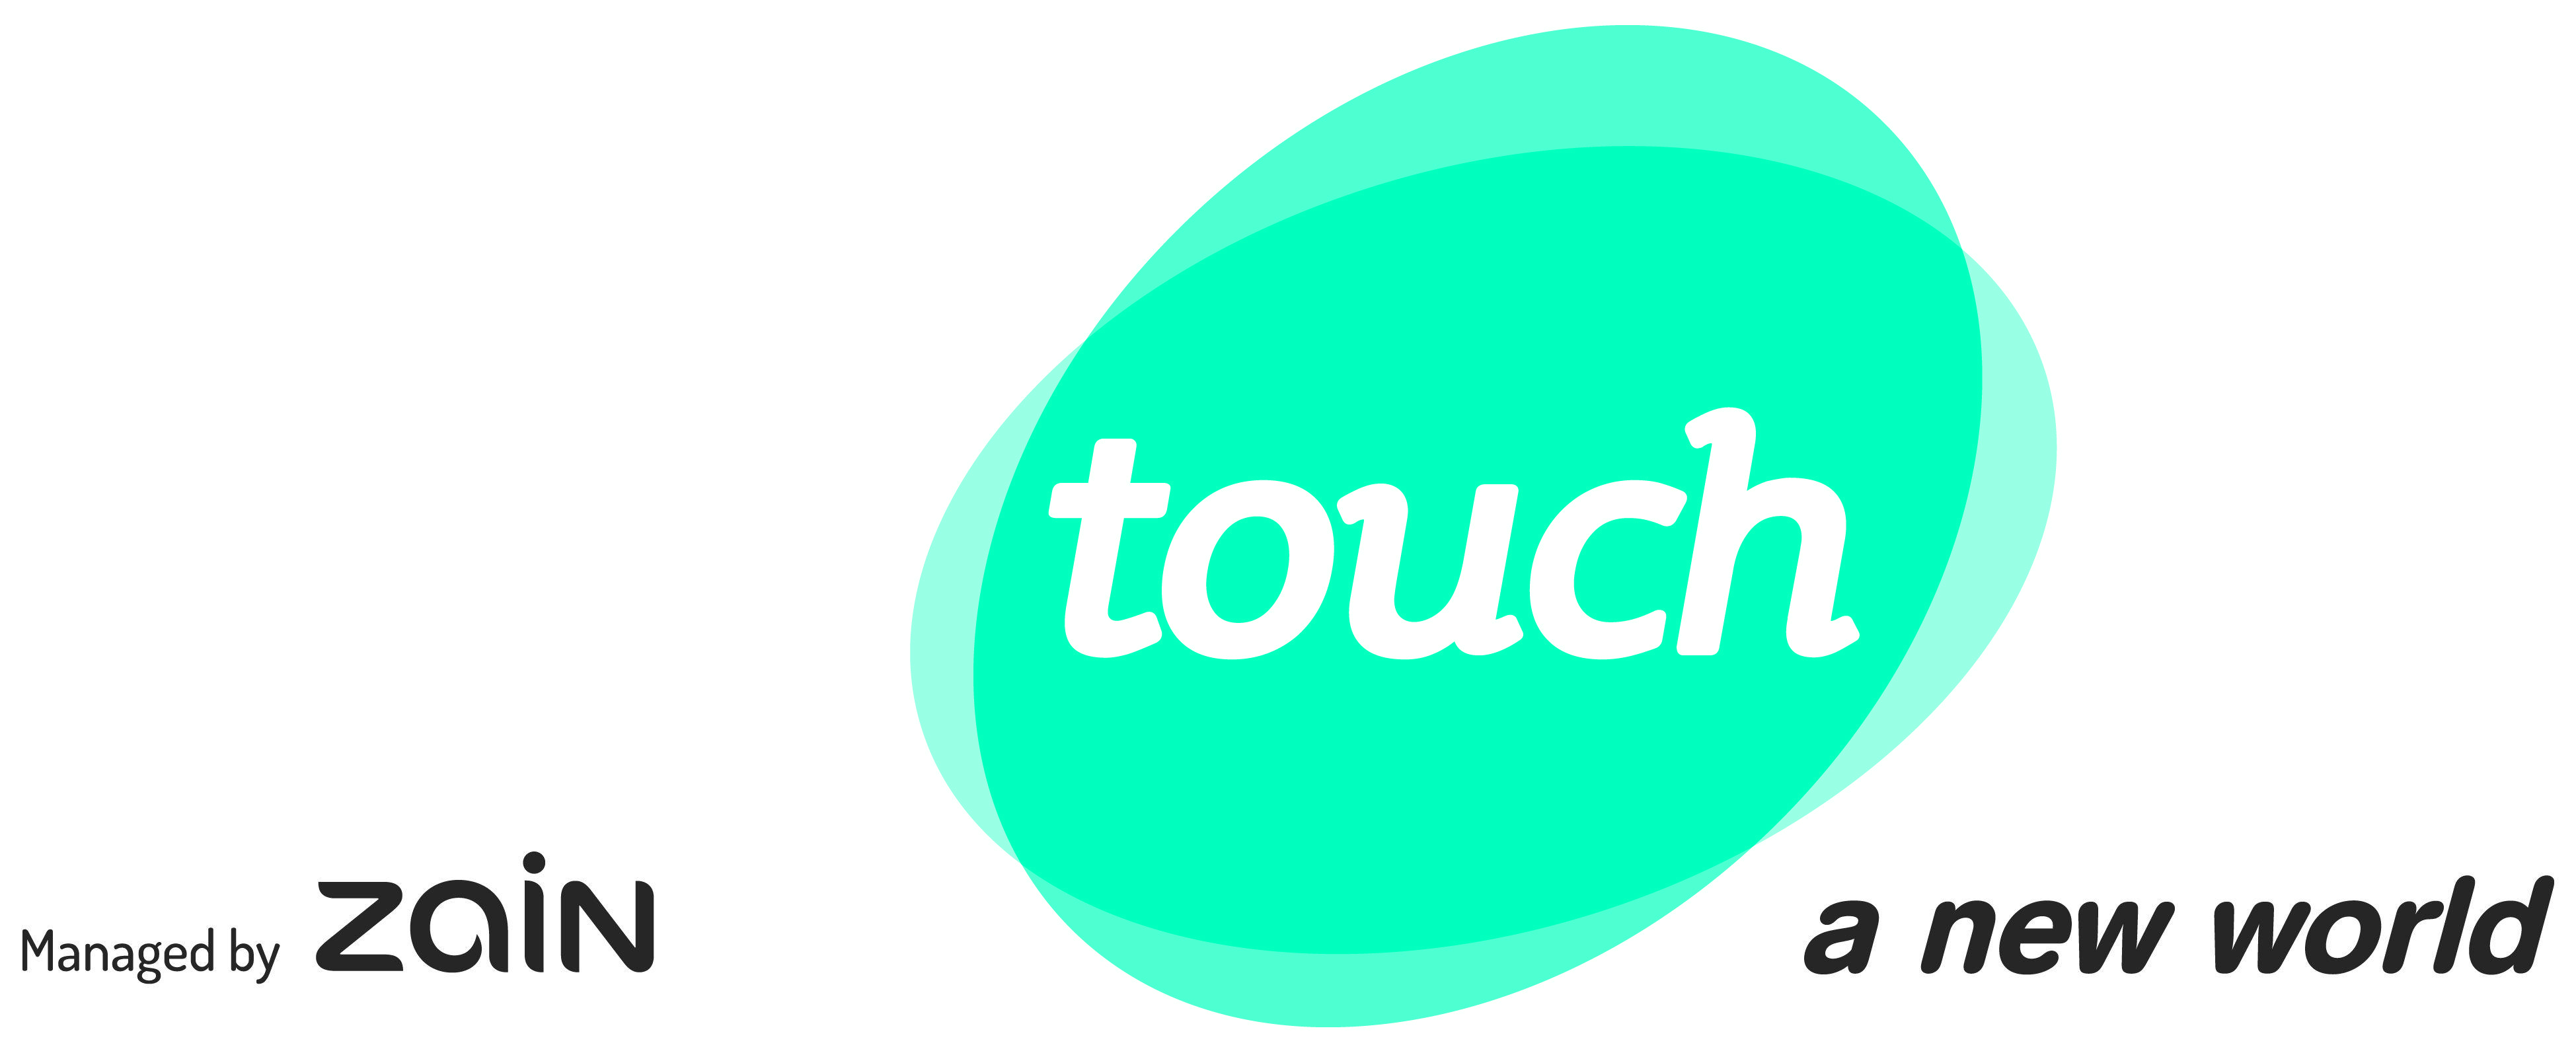 Touch Logo - touch supports localfestivals leveragingtourism and the economy ...